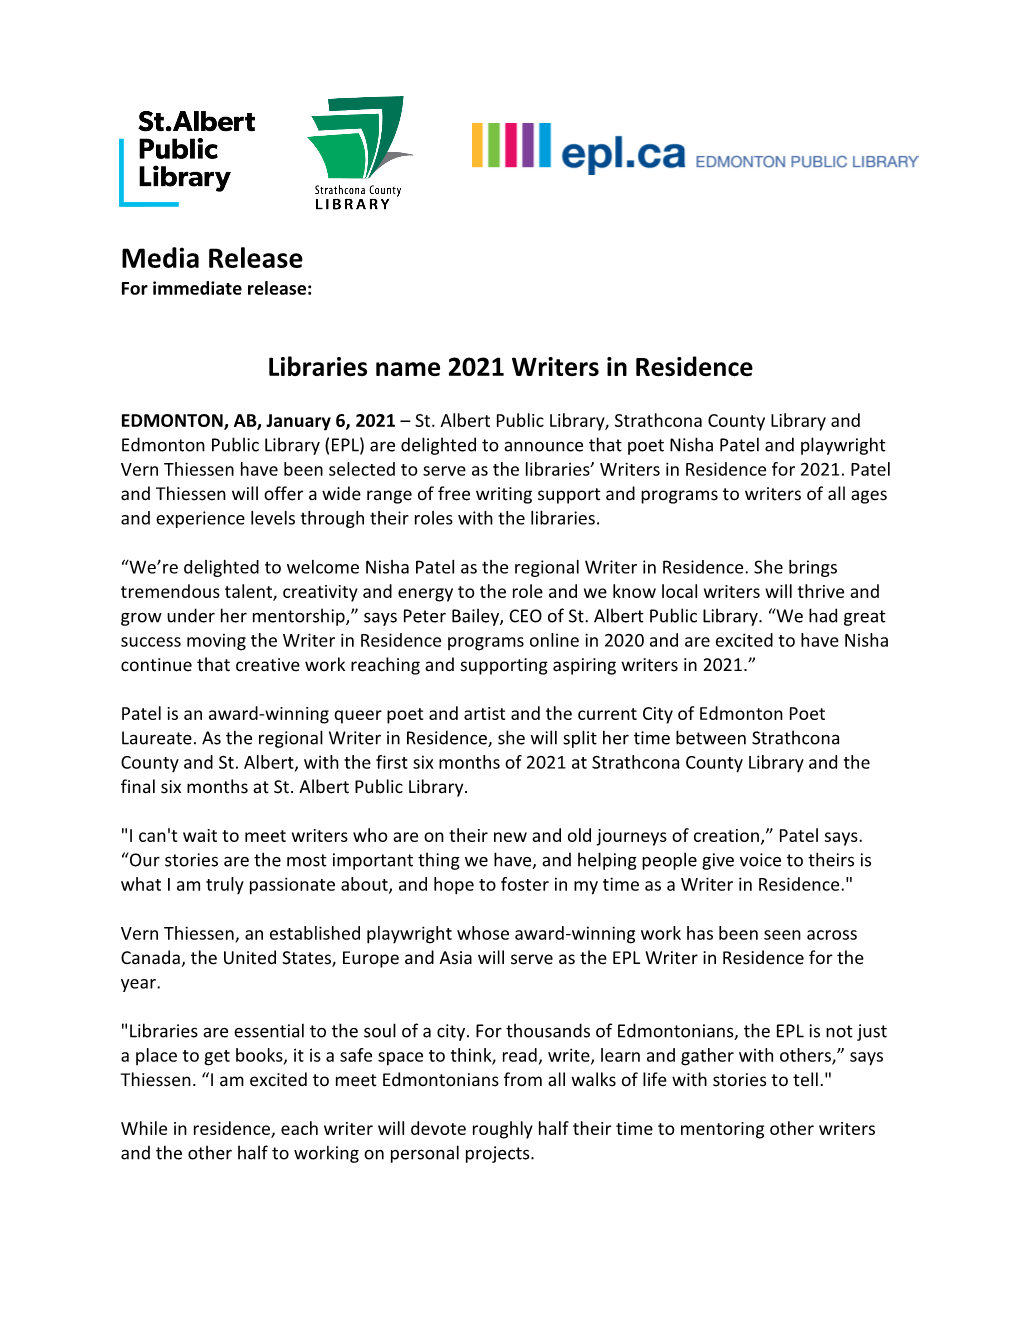 Libraries Announce 2021 Writers in Residence